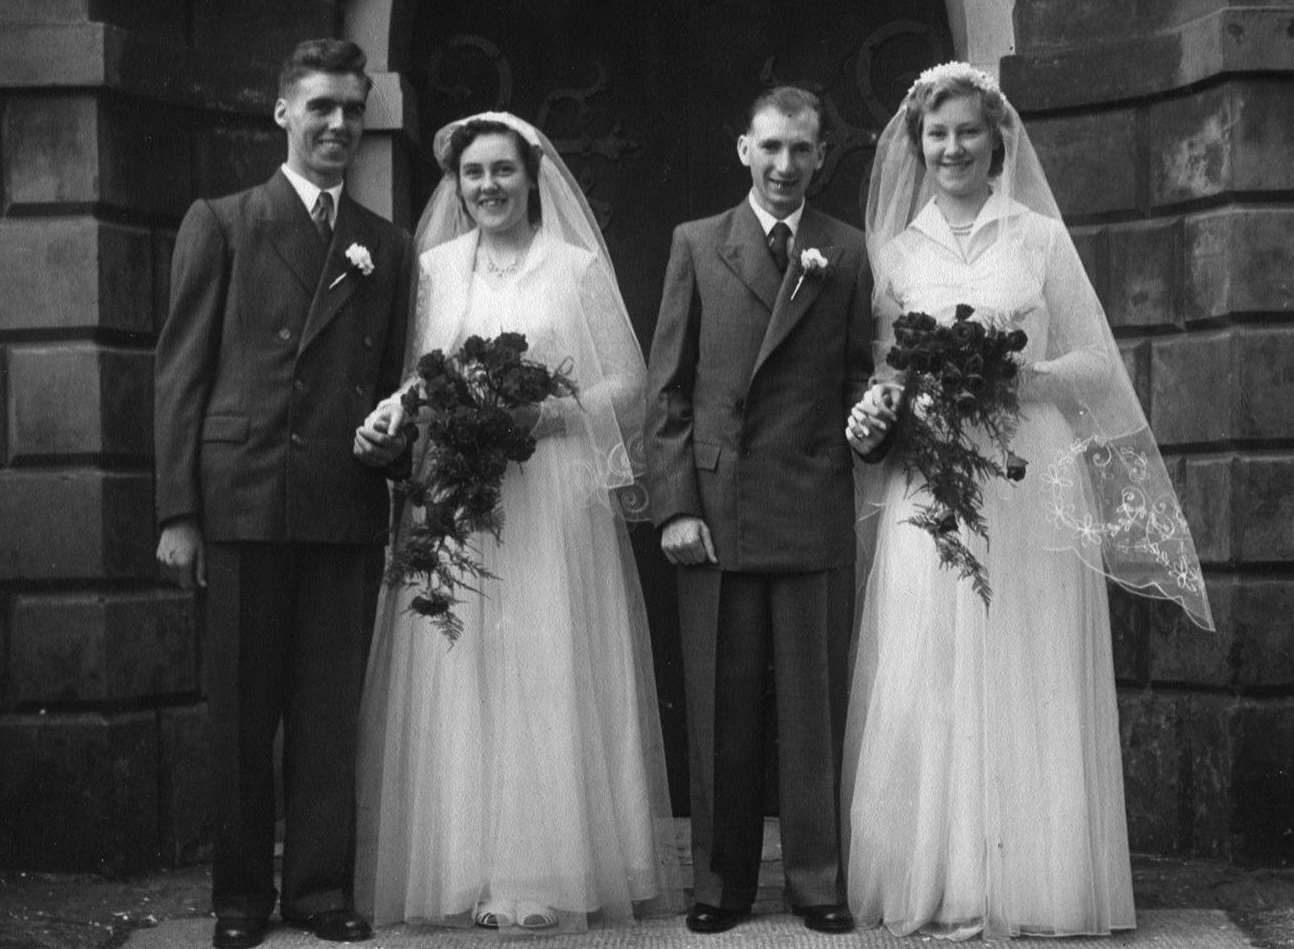 A double wedding in 1954 - John and Brenda Masters and Alan and Brenda Harris